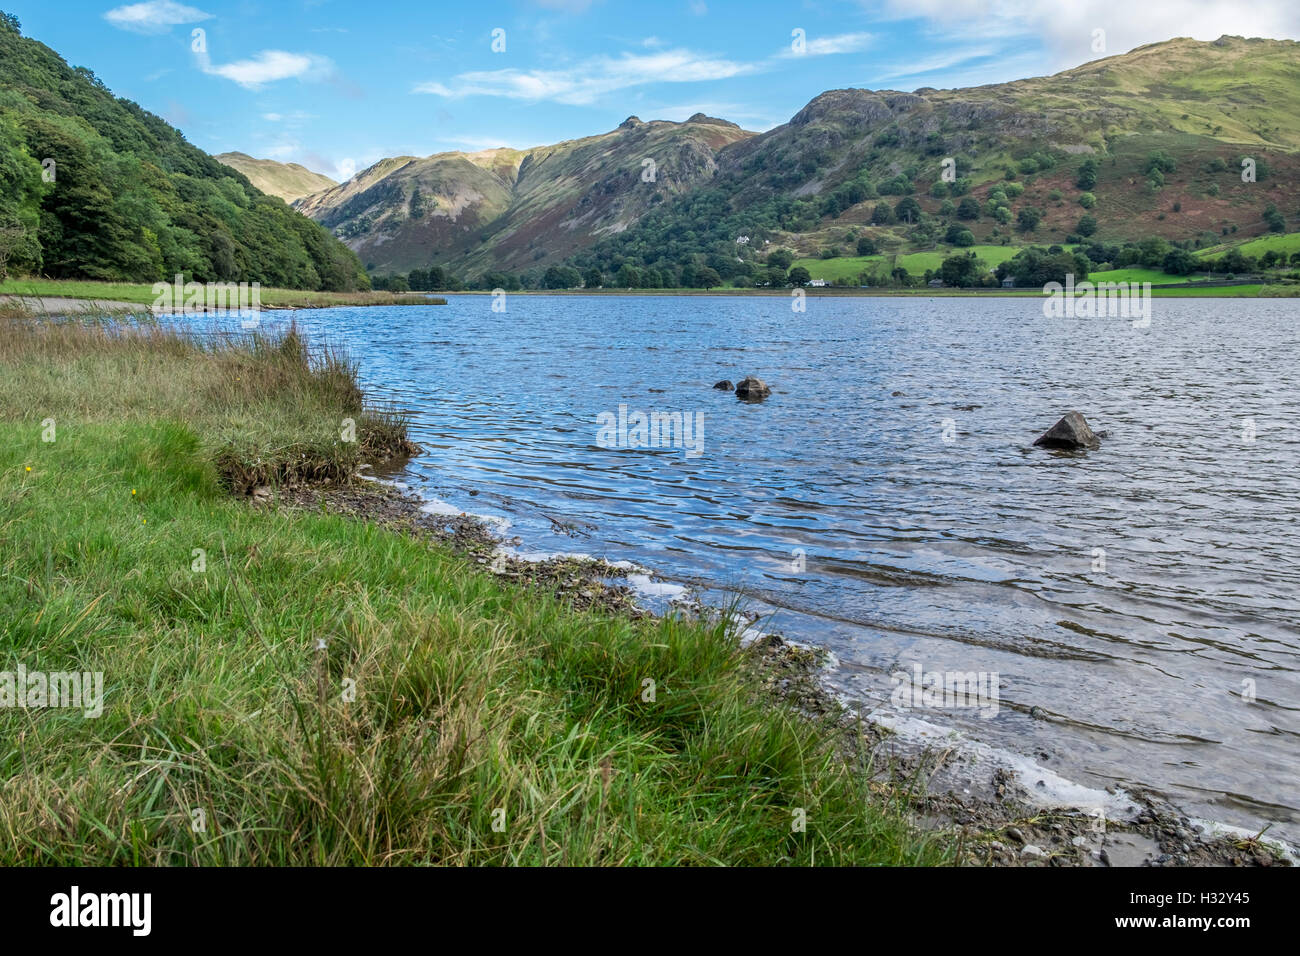 The banks of Brothers Water in the Lake district, Cumbria, with the mountains in the distance. Stock Photo